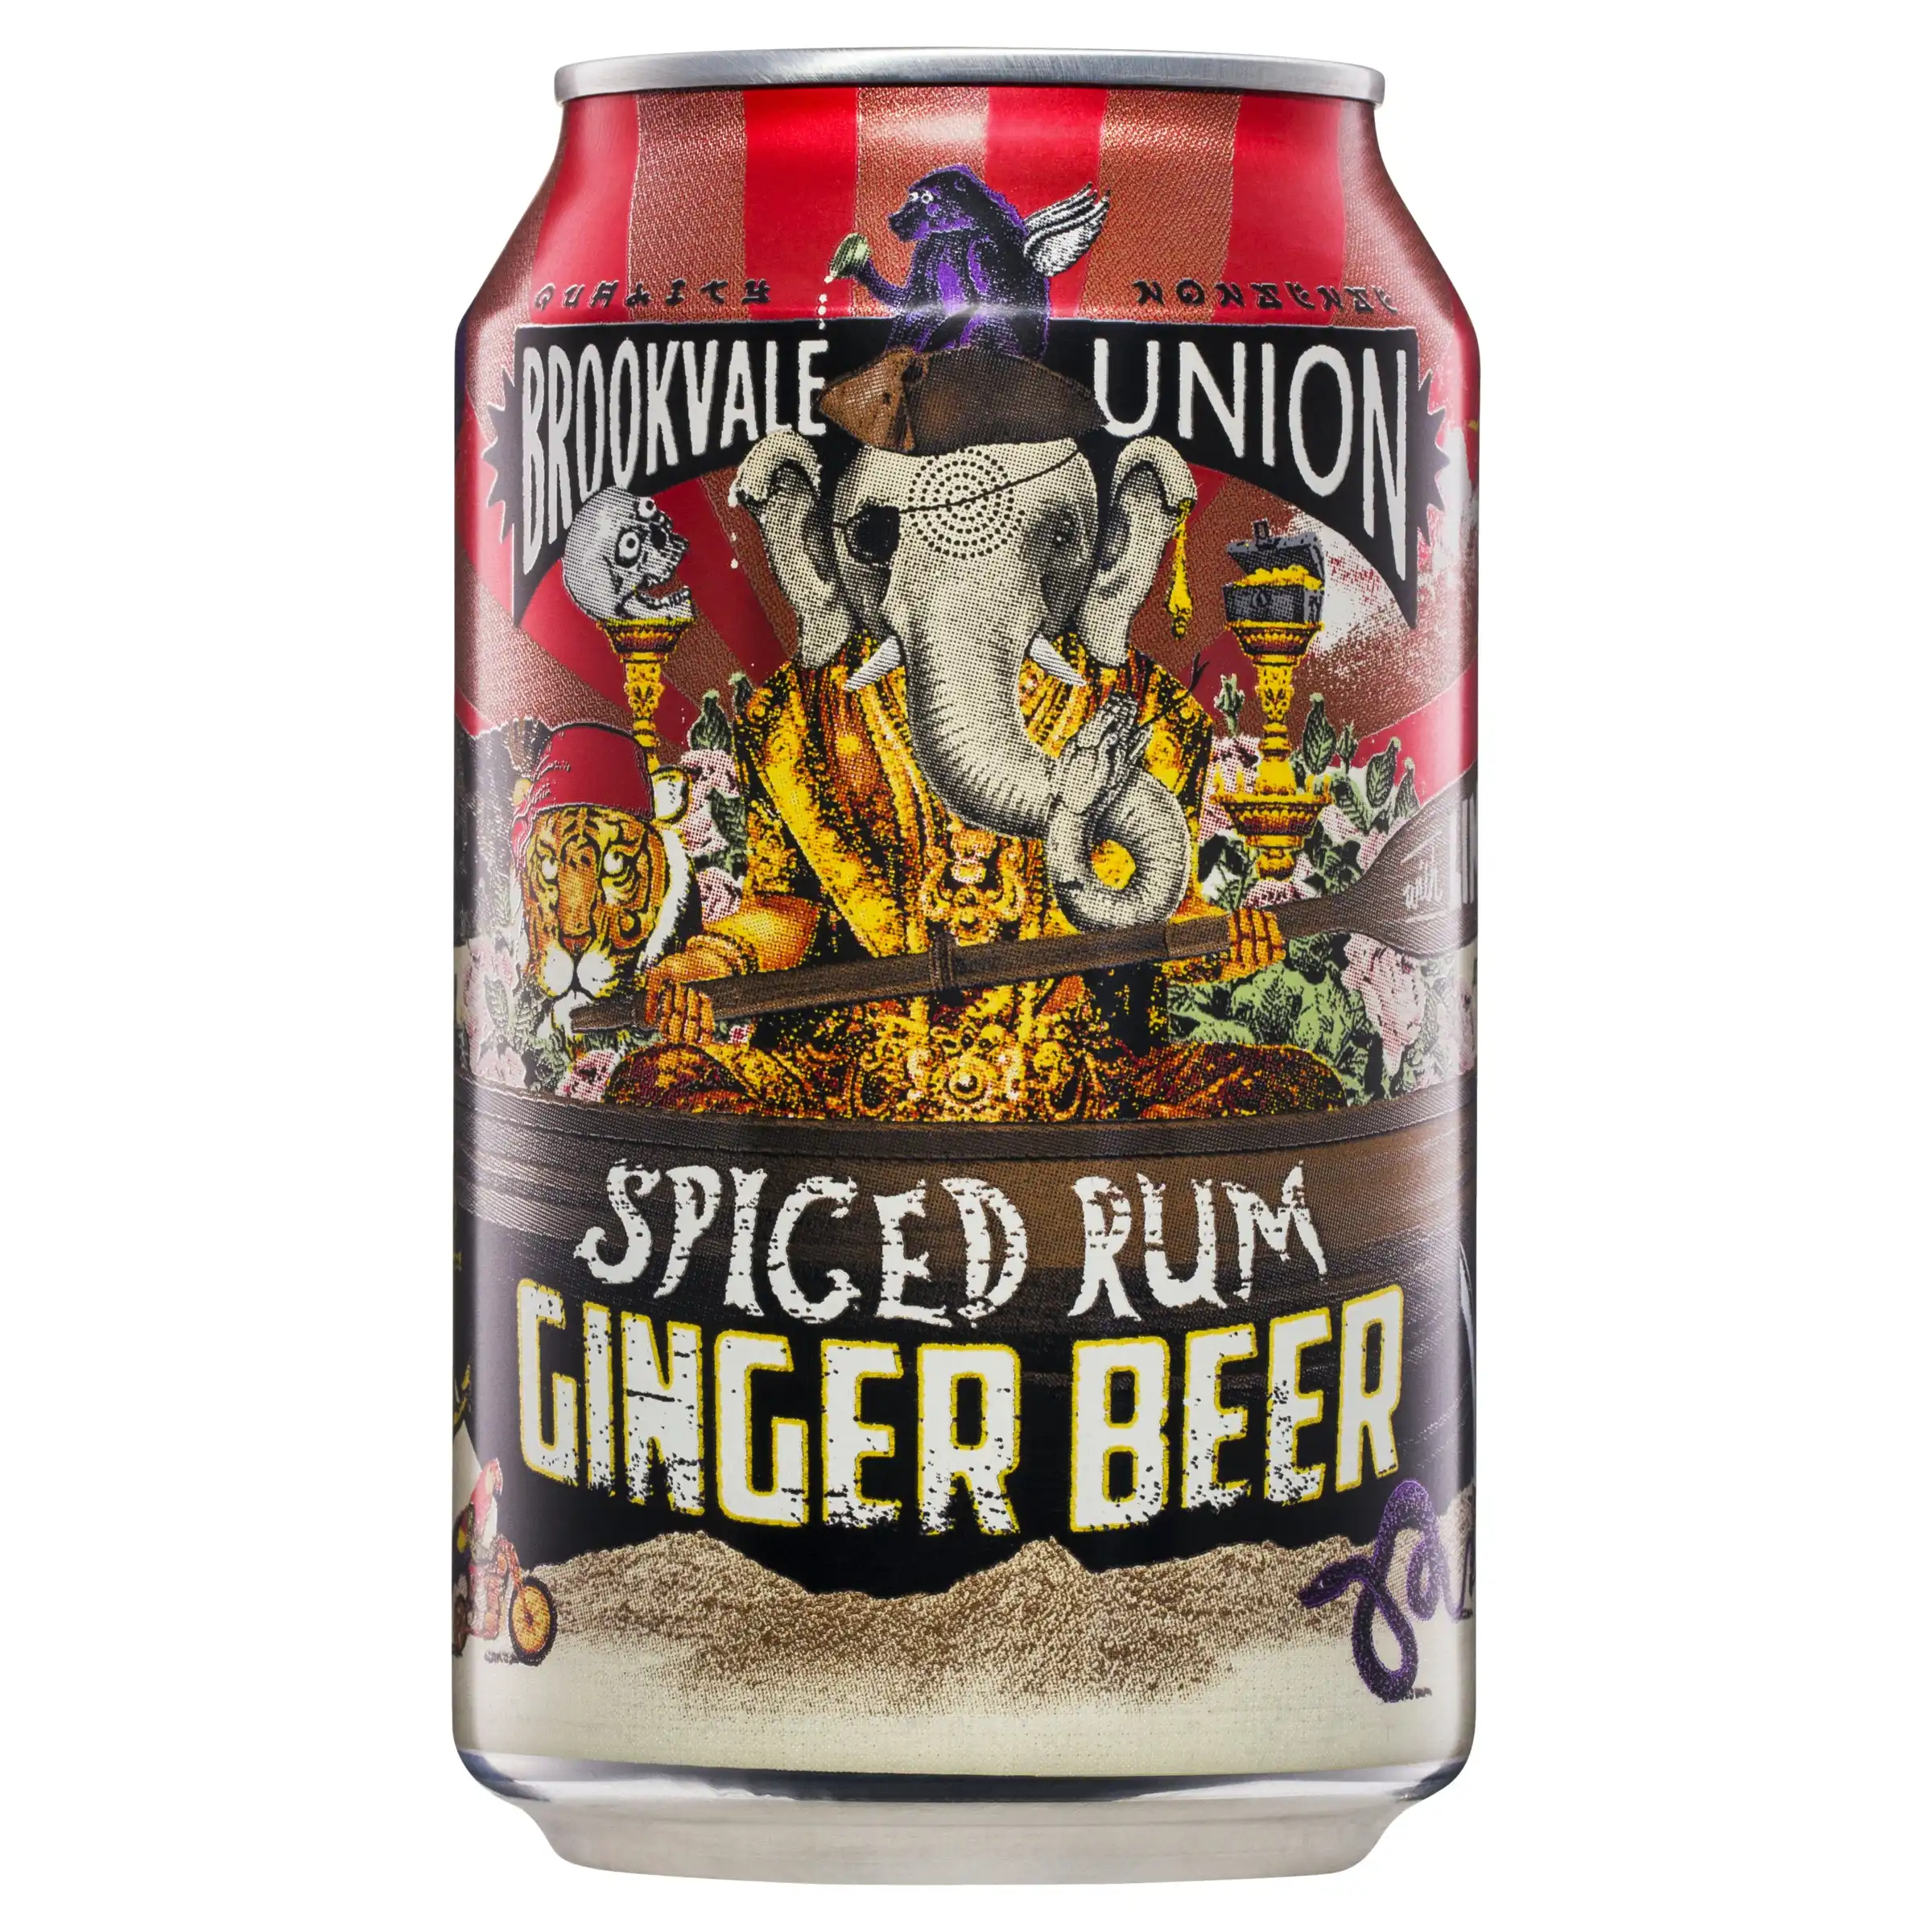 Brookvale Union Spiced Rum and Ginger Beer Case (4 x 6 x 330mL Can)